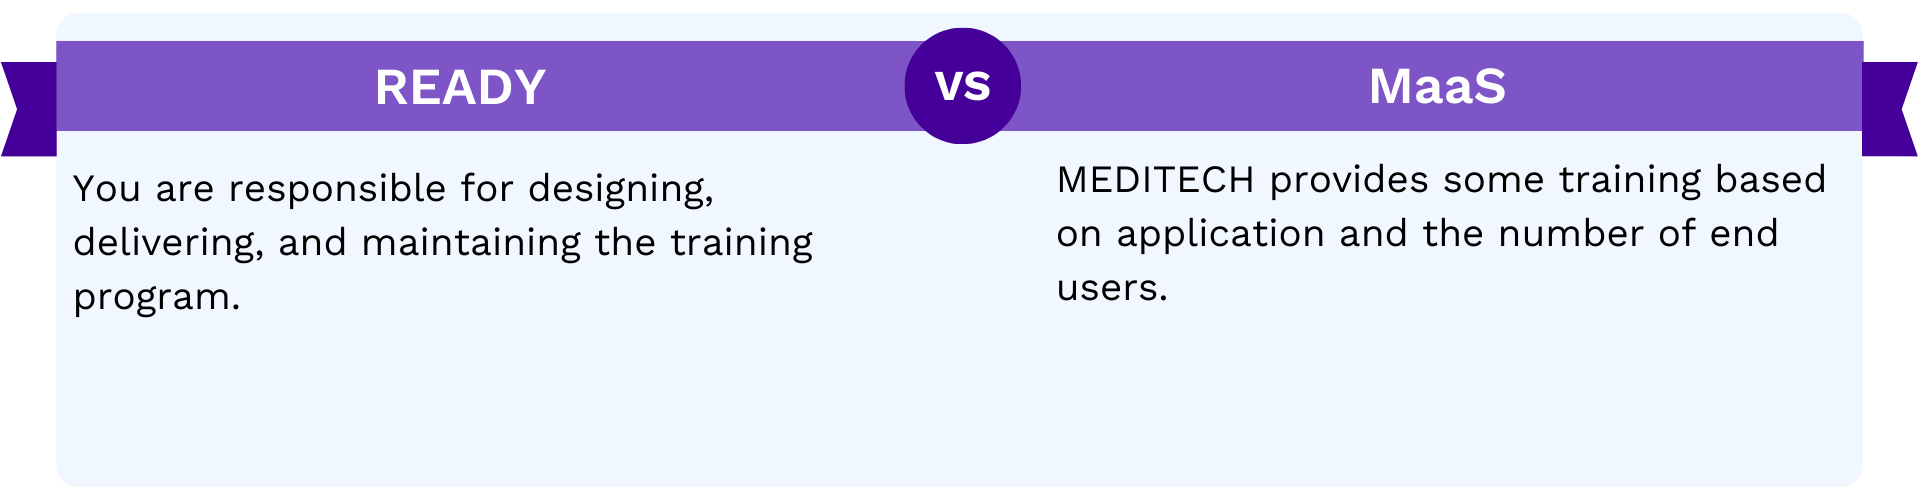 Training Considerations: In-House vs. MEDITECH-Based Training with MaaS – Custom vs. Pre-Packaged Approach.